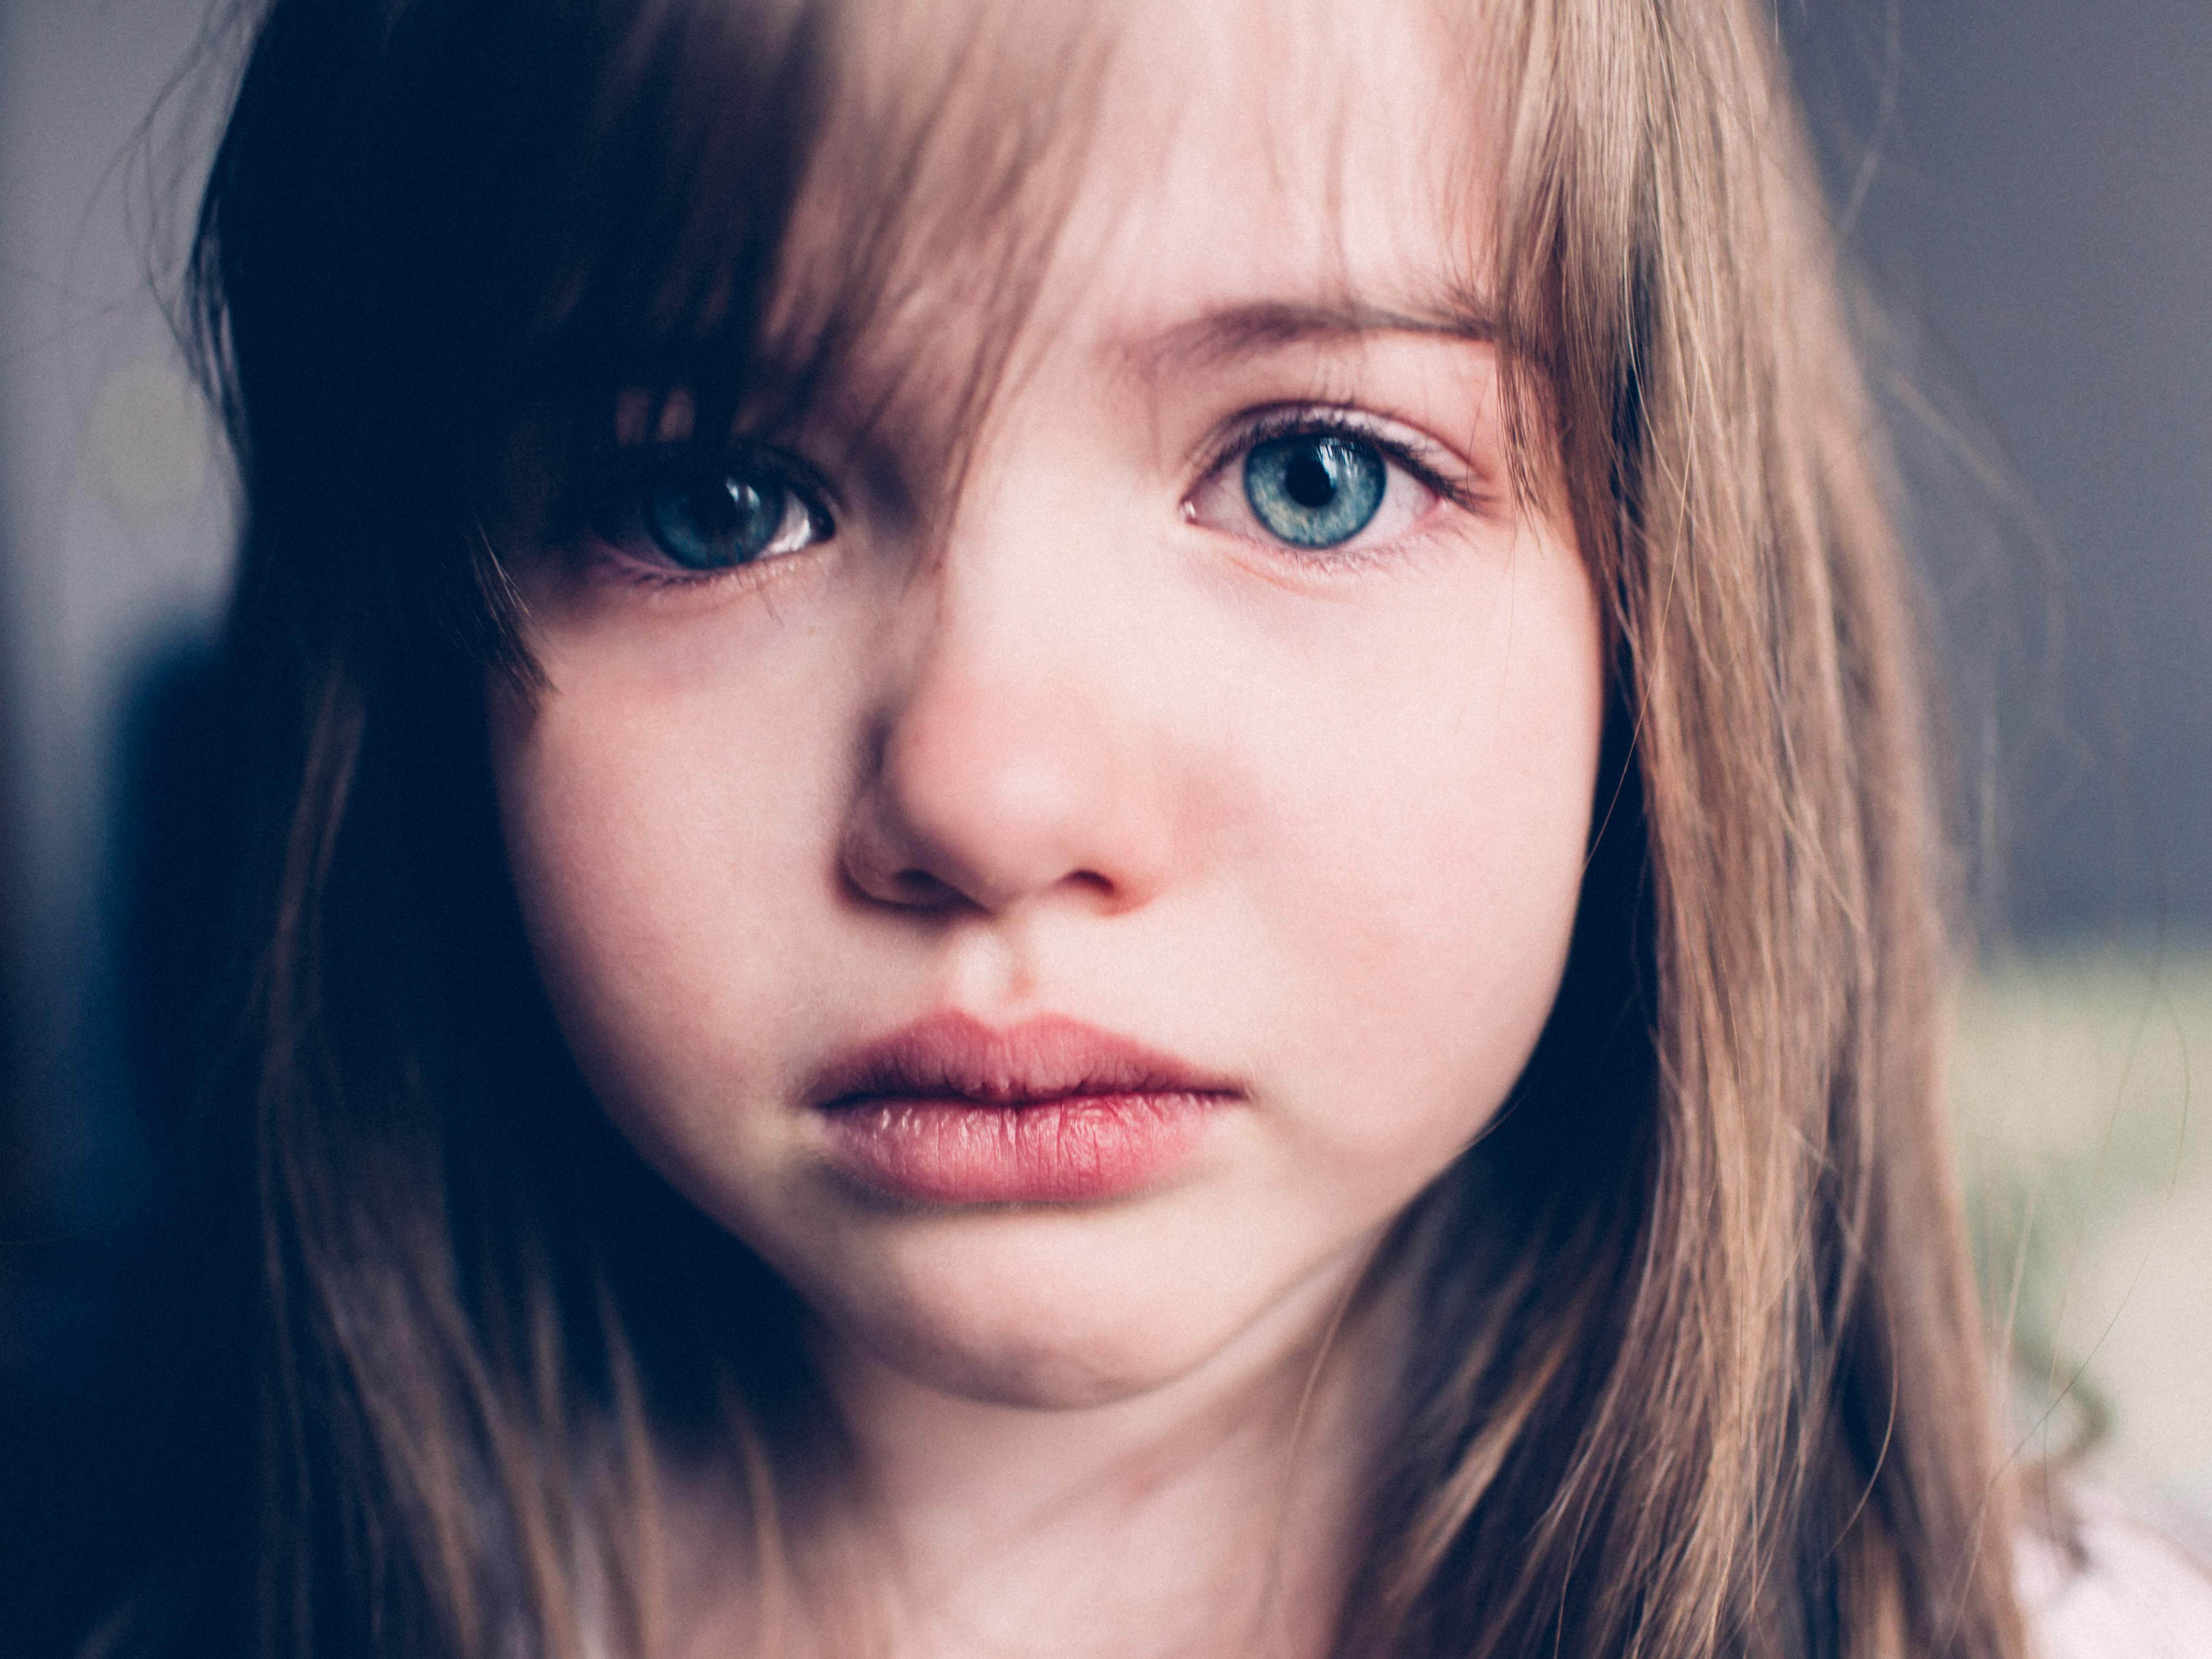 A crying girl | Source: Shutterstock